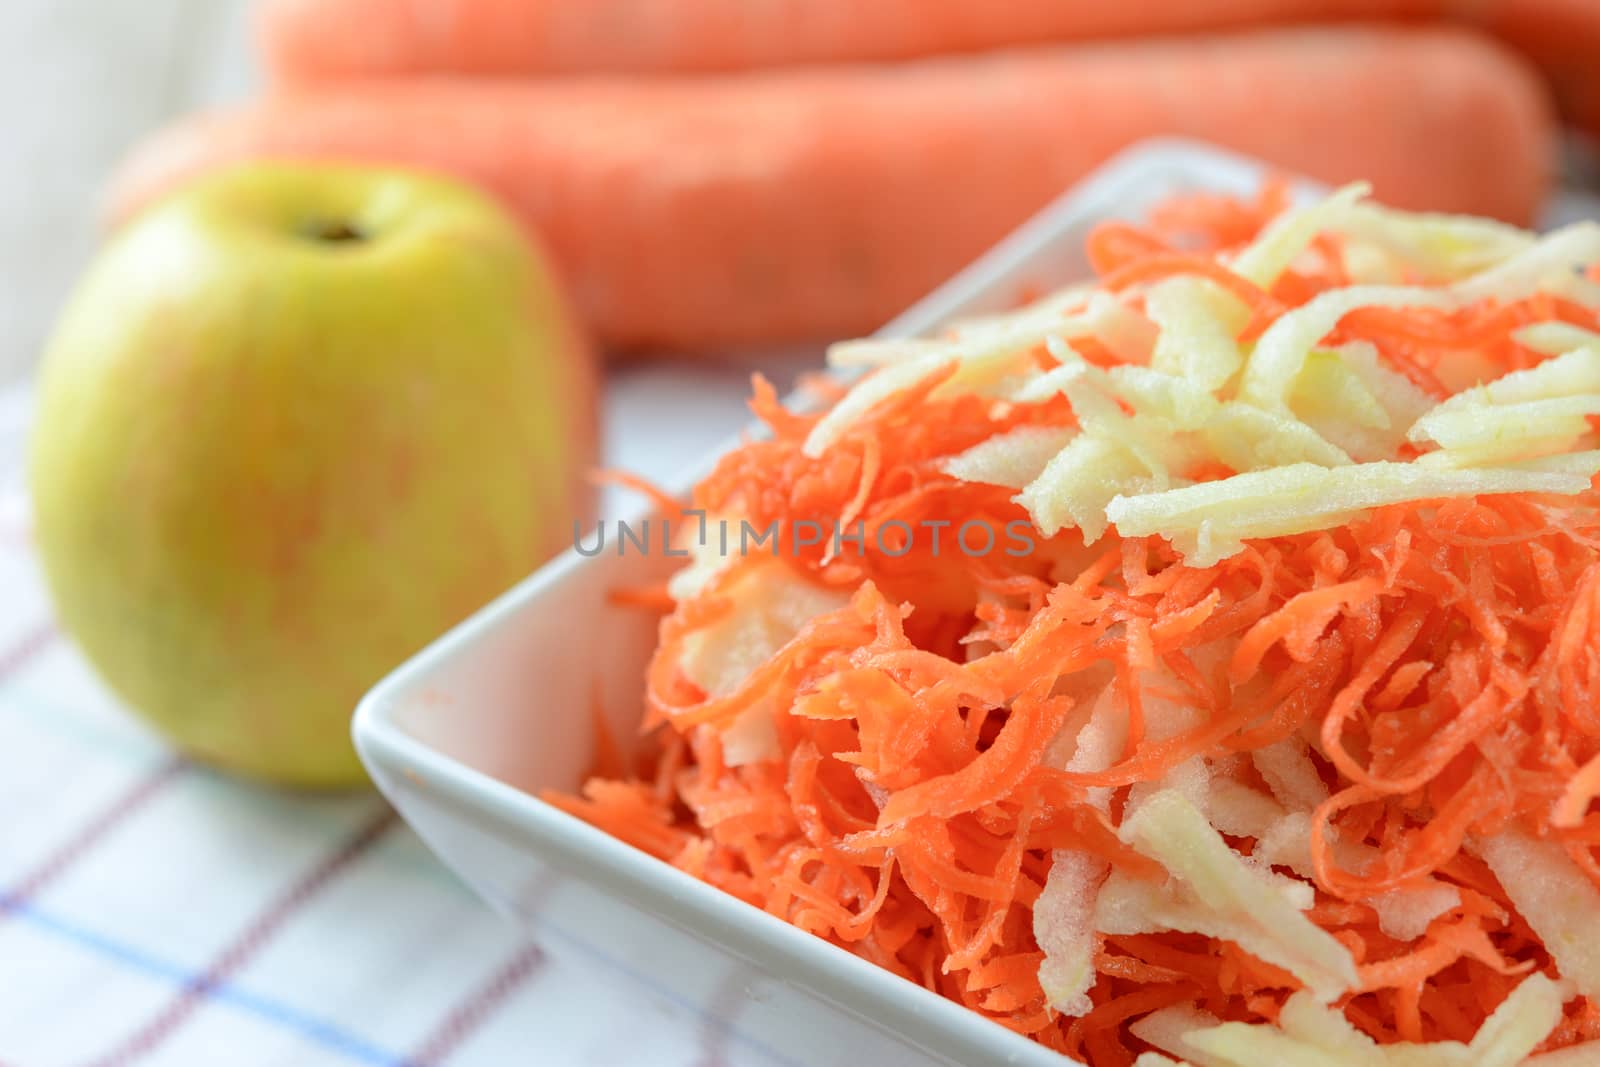 Carrots with apple salad by wdnet_studio